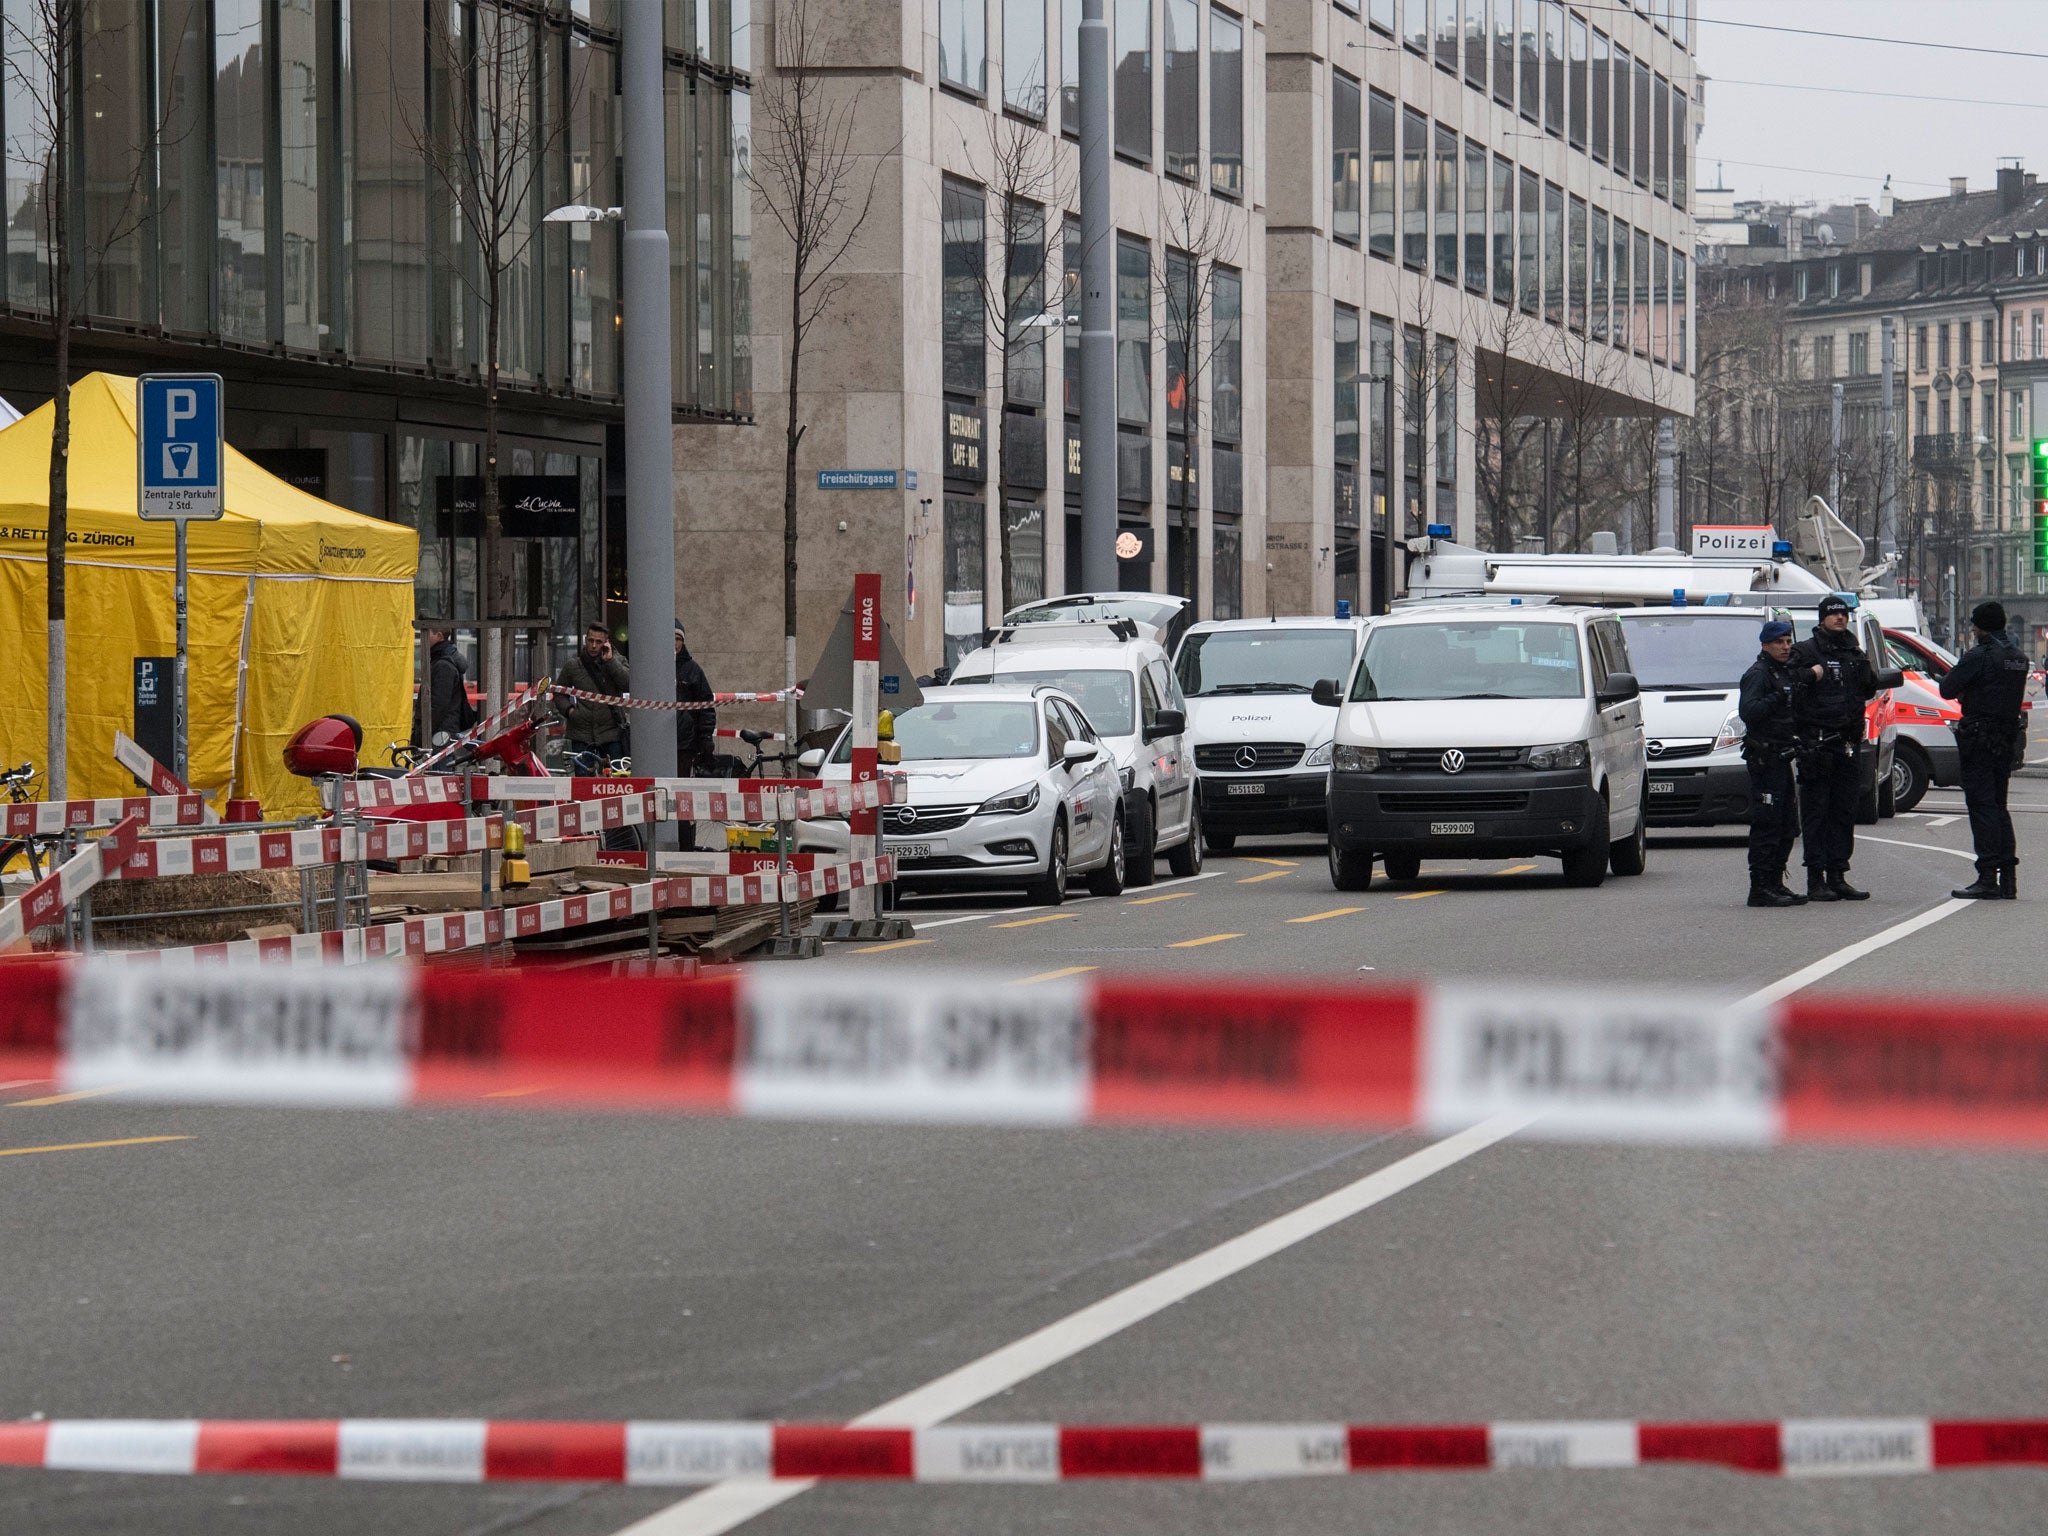 Forensic experts and Swiss police secure evidence at the scene